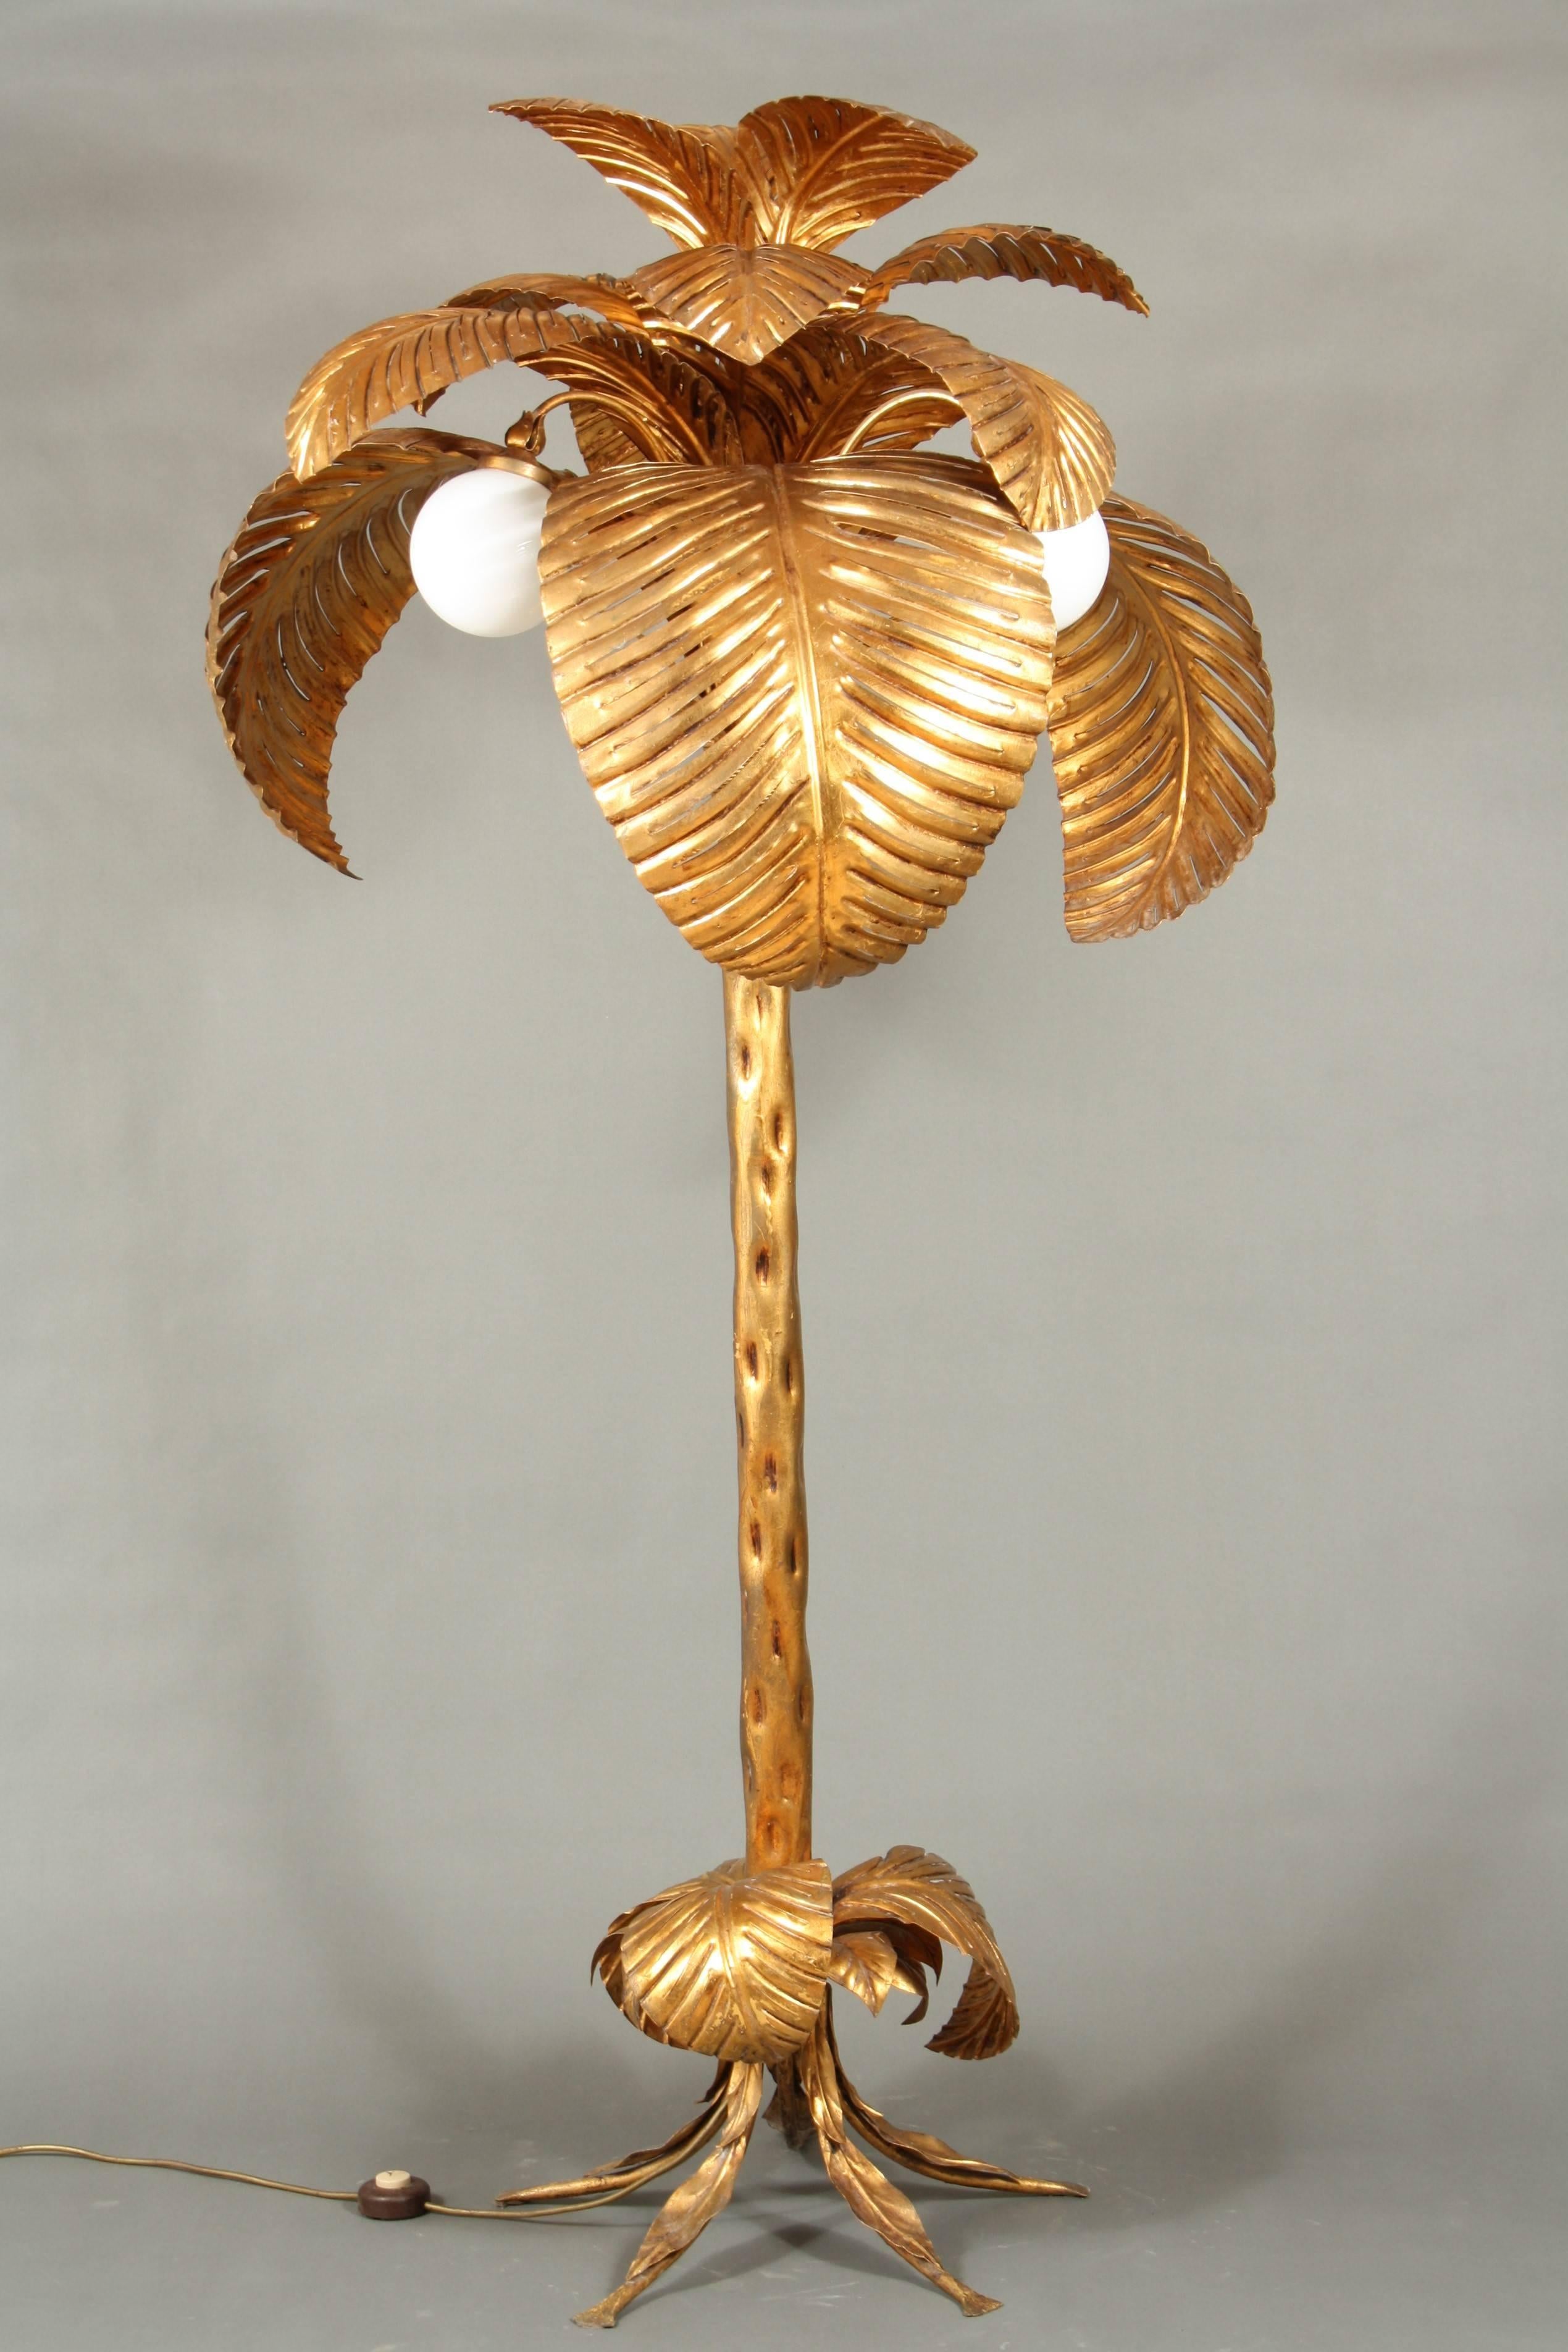 Huge mid-20th century Palm tree floor lamp from the 1960s with beautiful big leaves. The palm has three frosted glass globes. 
A really unique and fantastic lamp for a nice home.